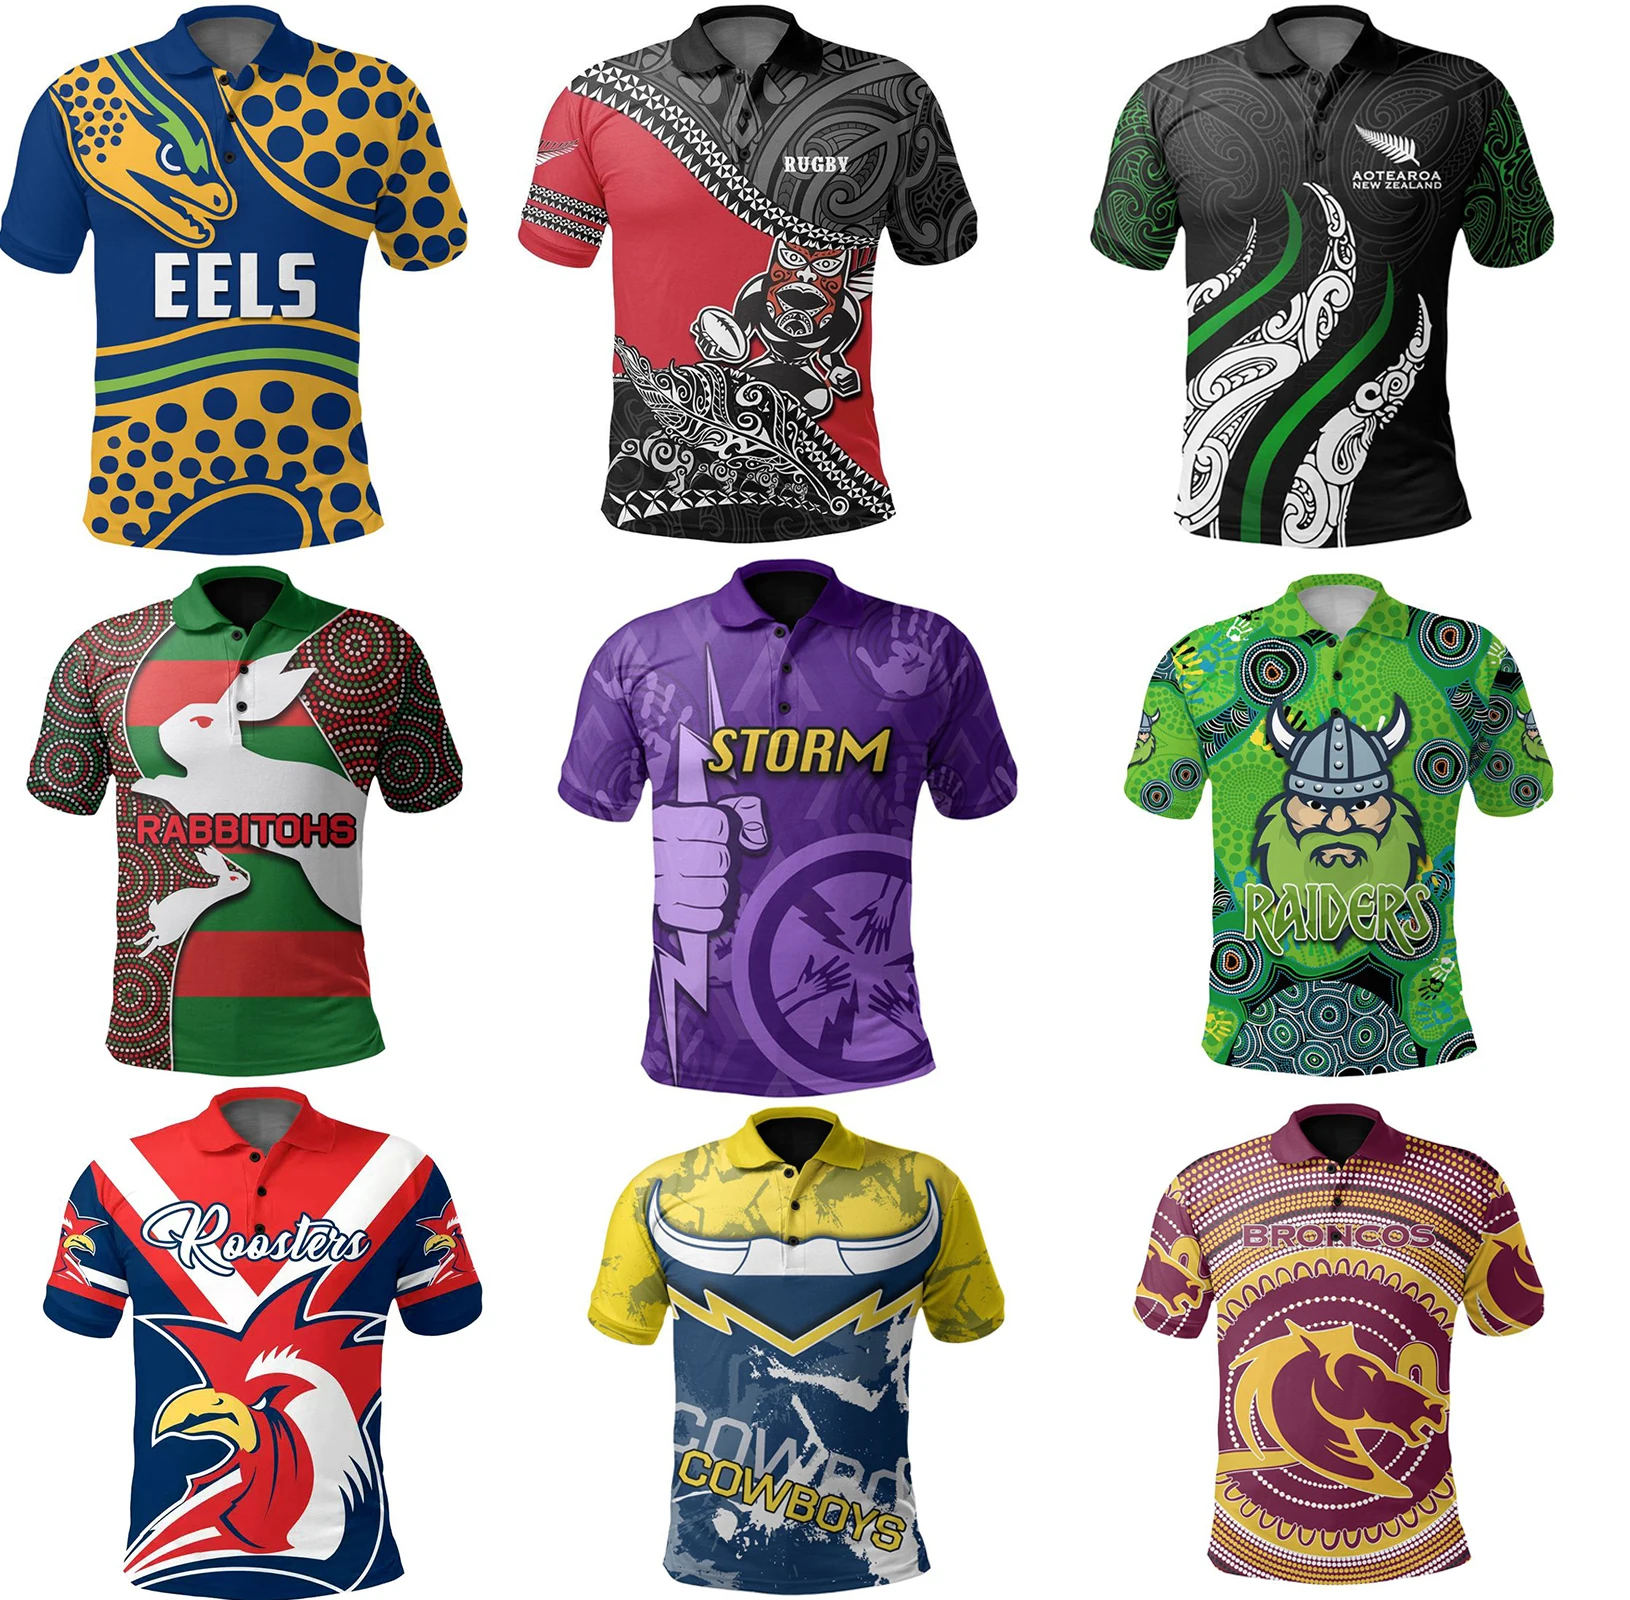 

2020 Panthers Melbourne Storm Rabbitohs Maori Broncos Roosters EELS Rugby Jersey Rugby POLO